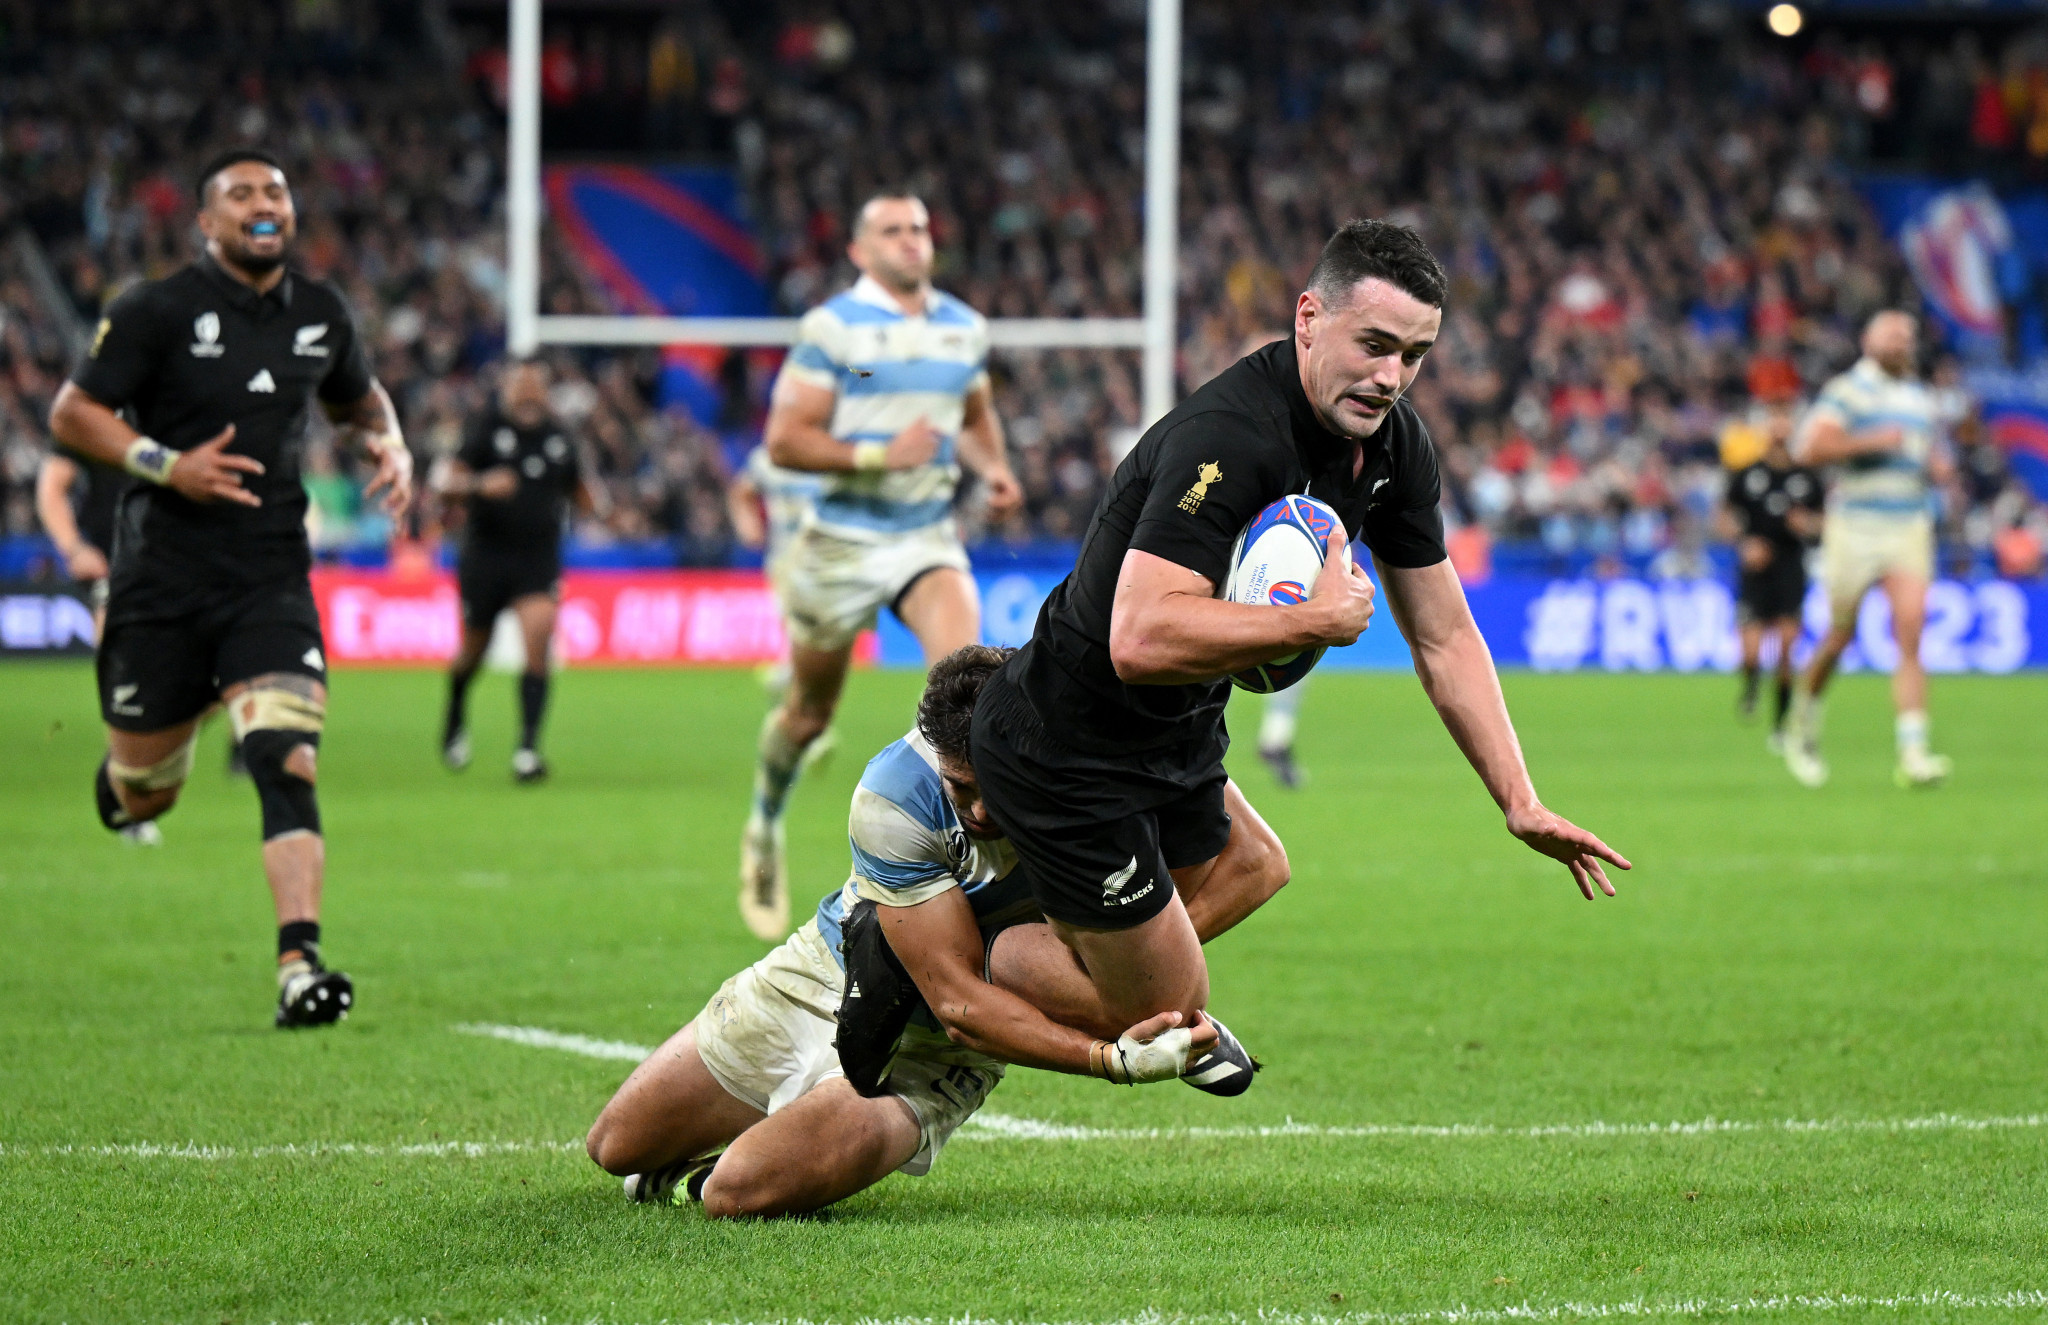 Jordan equals record as New Zealand annihilate Argentina in Rugby World Cup